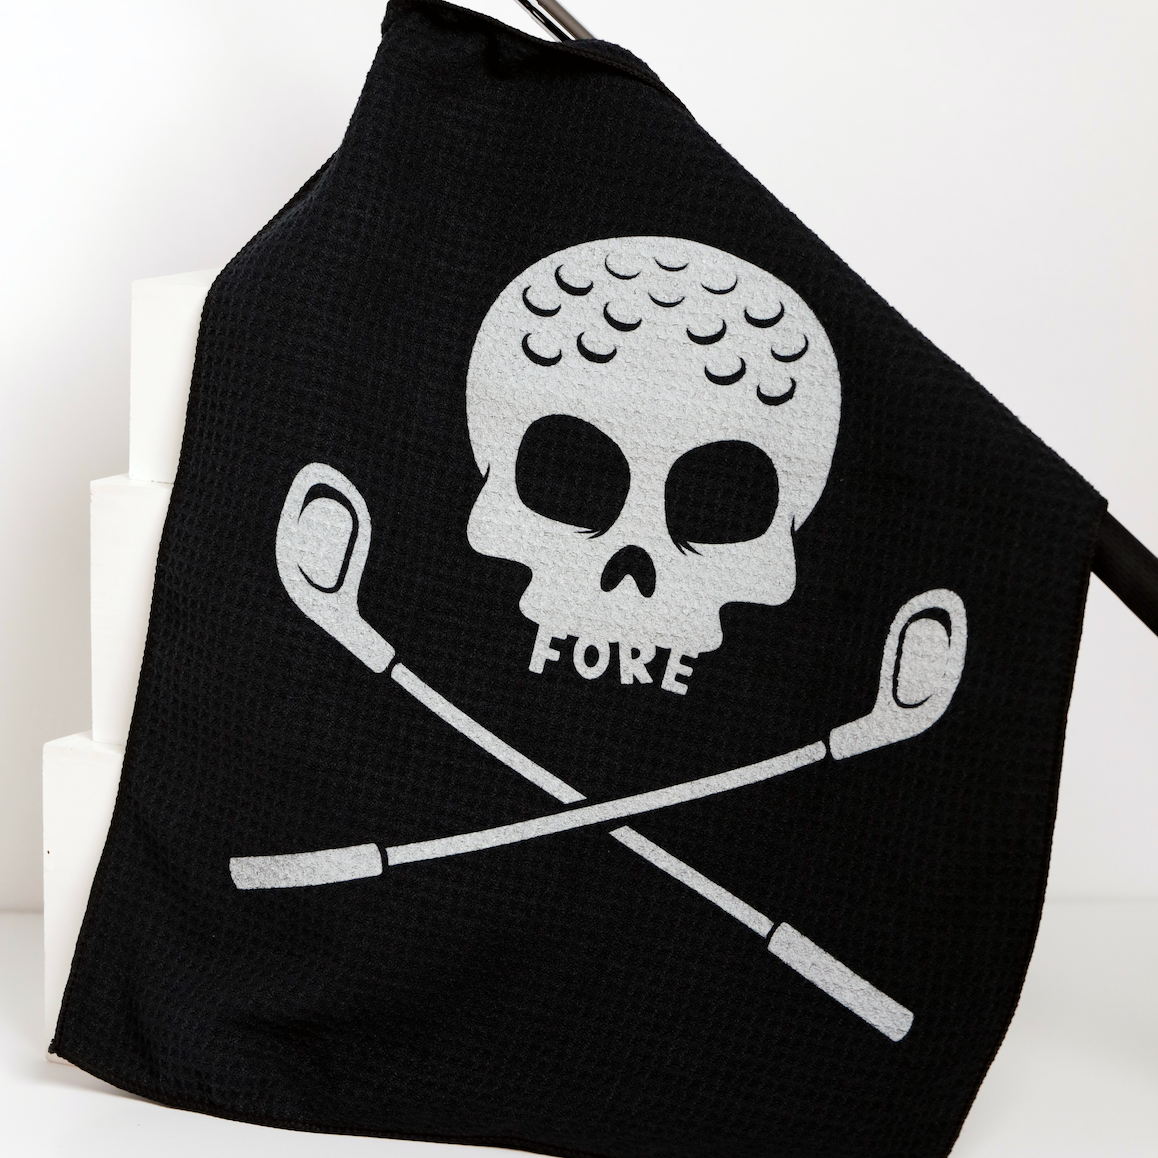 Old Charter Bourbon 12 Year Old Themed Golf Towel with Hook